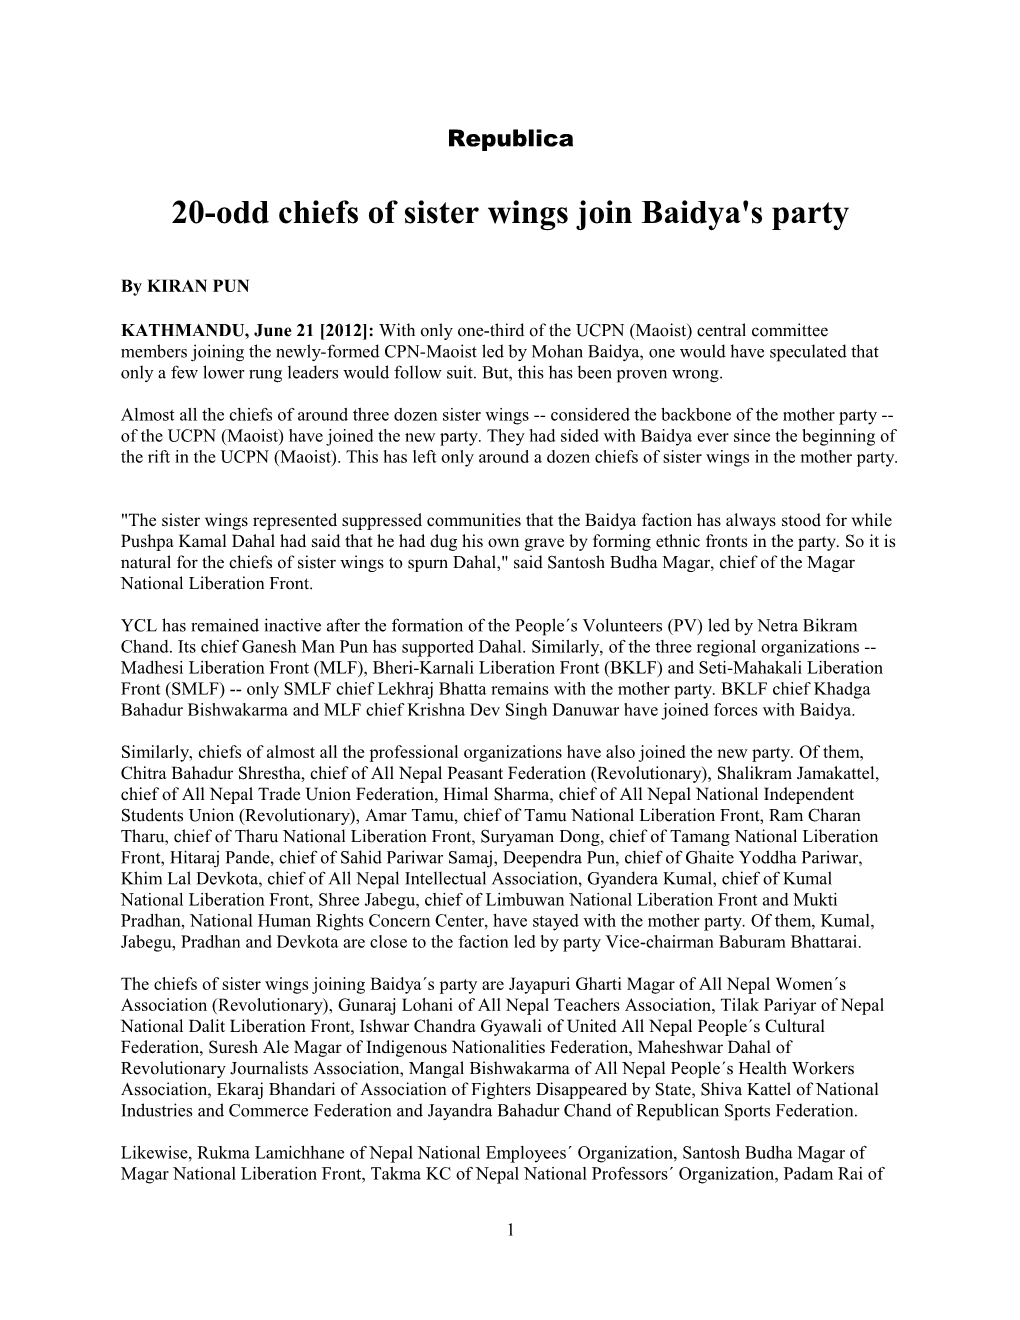 20-Odd Chiefs of Sister Wings Join Baidya's Party